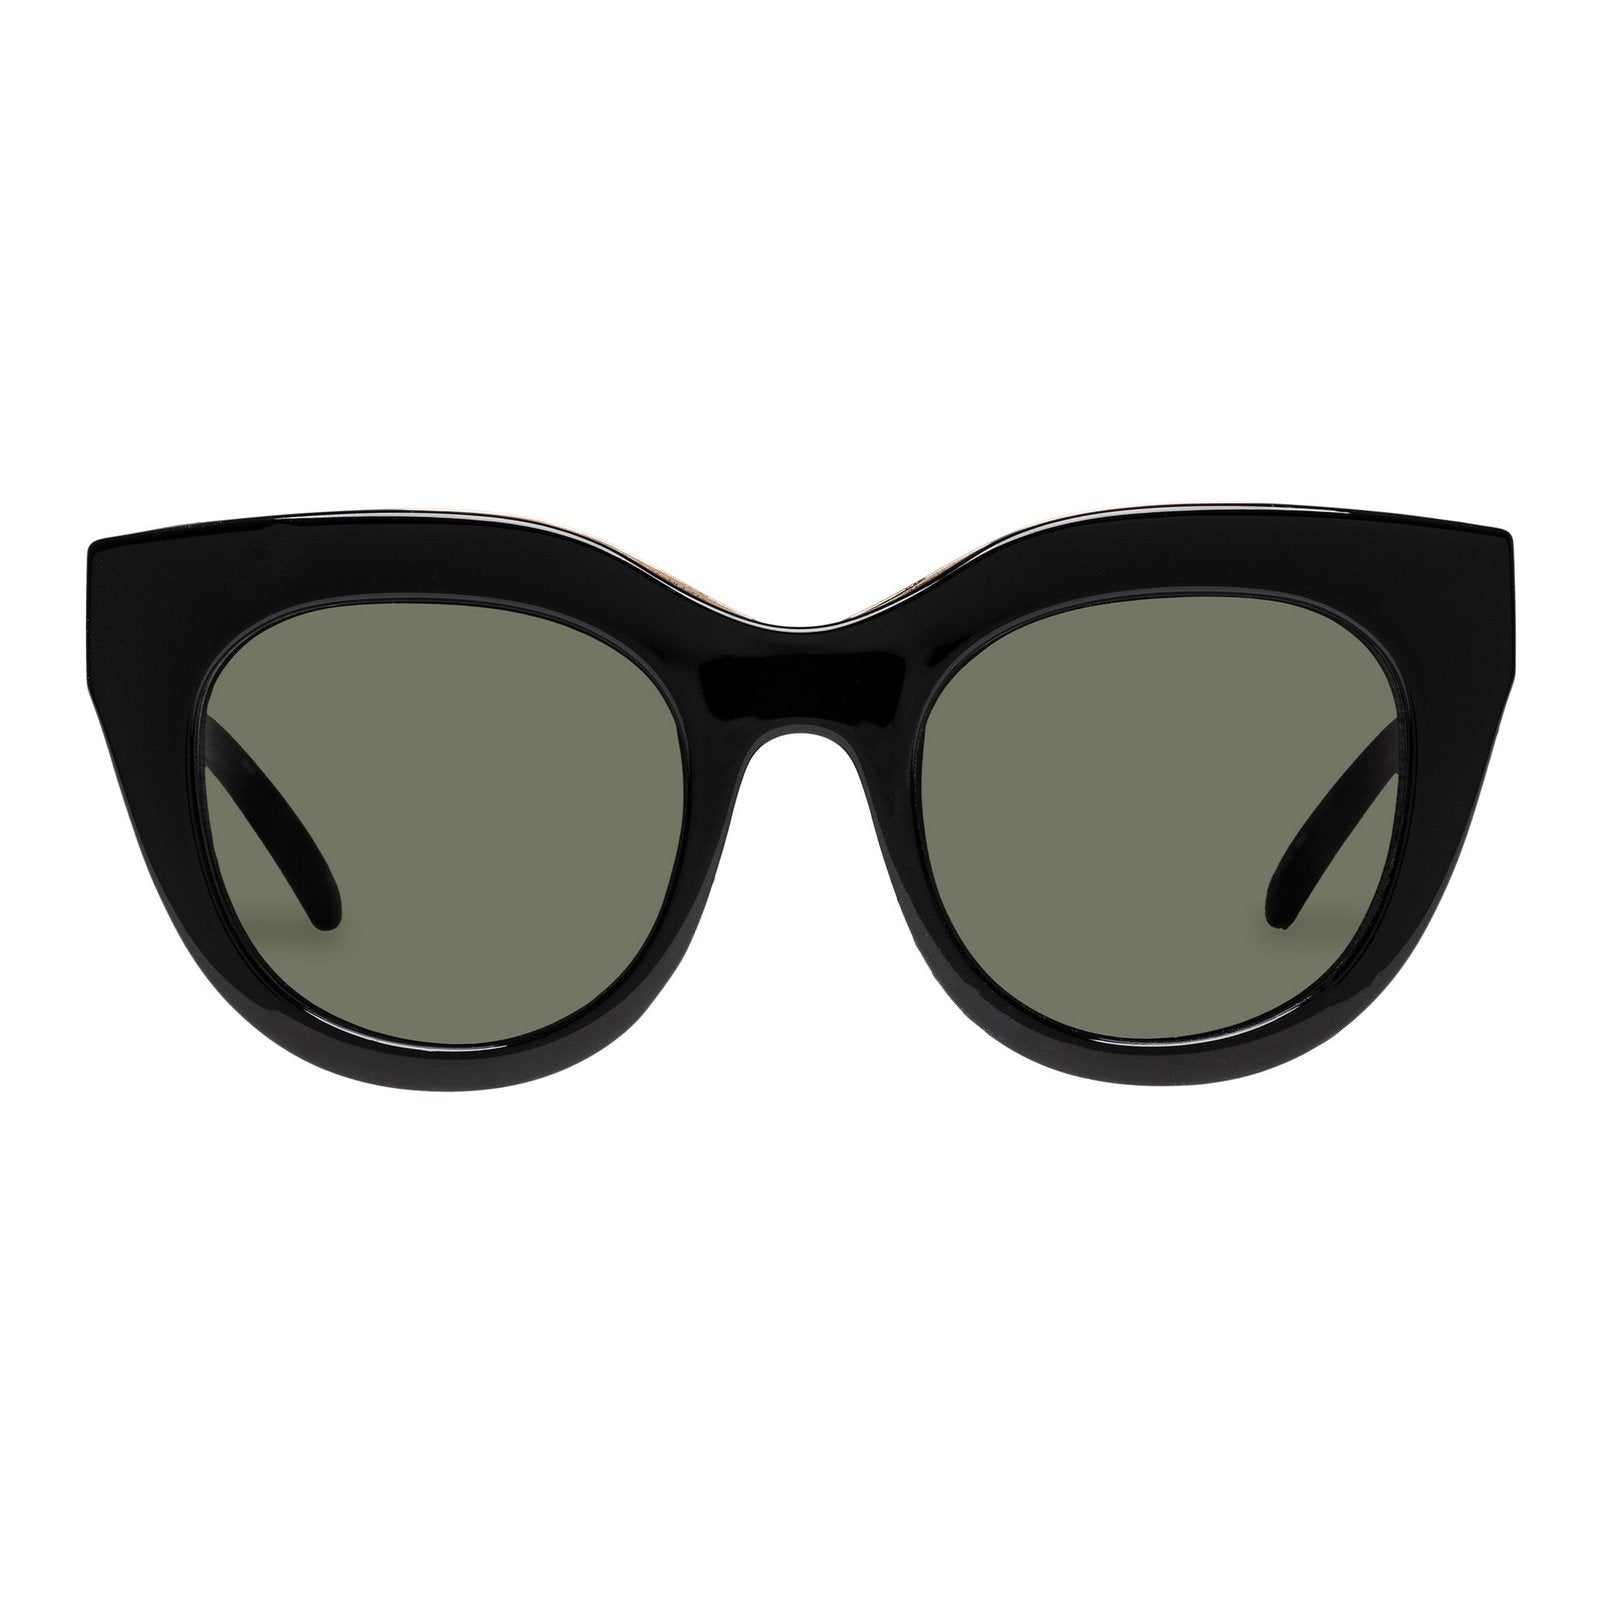 LE SPECS - AIR HEART SUNGLASSES IN BLACK/GOLD